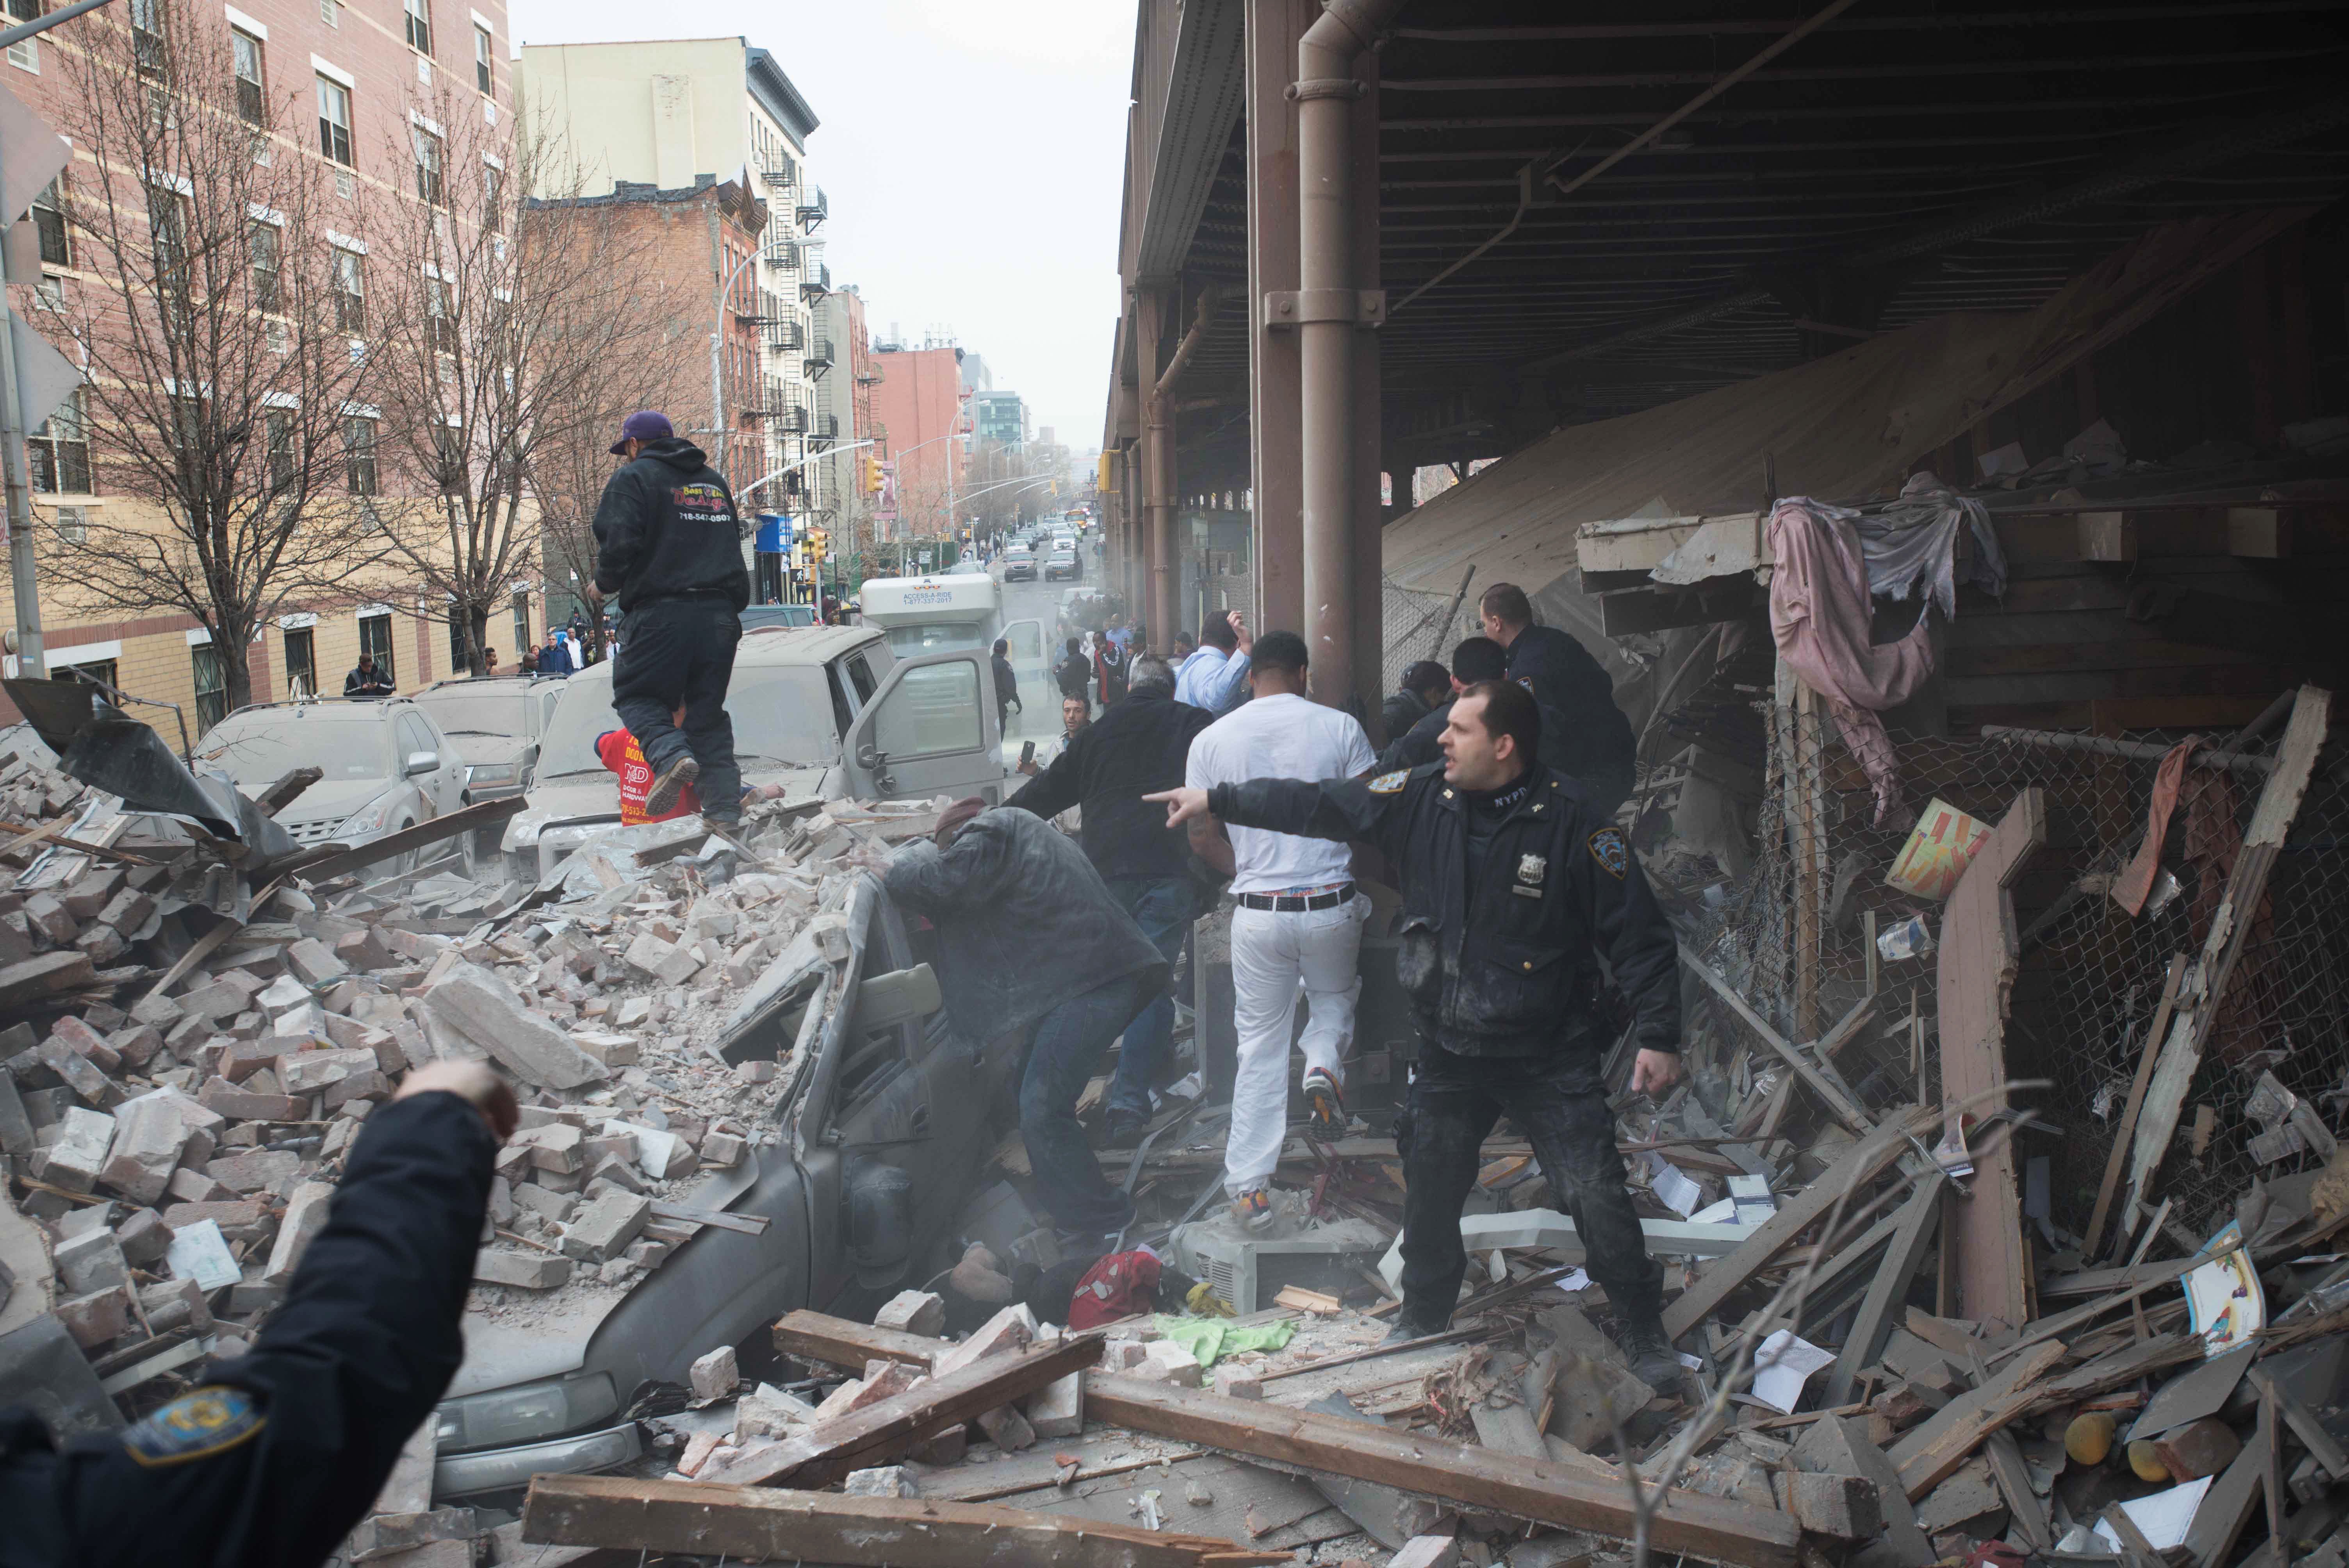 Police respond to the scene of an explosion that leveled two apartment buildings in East Harlem.